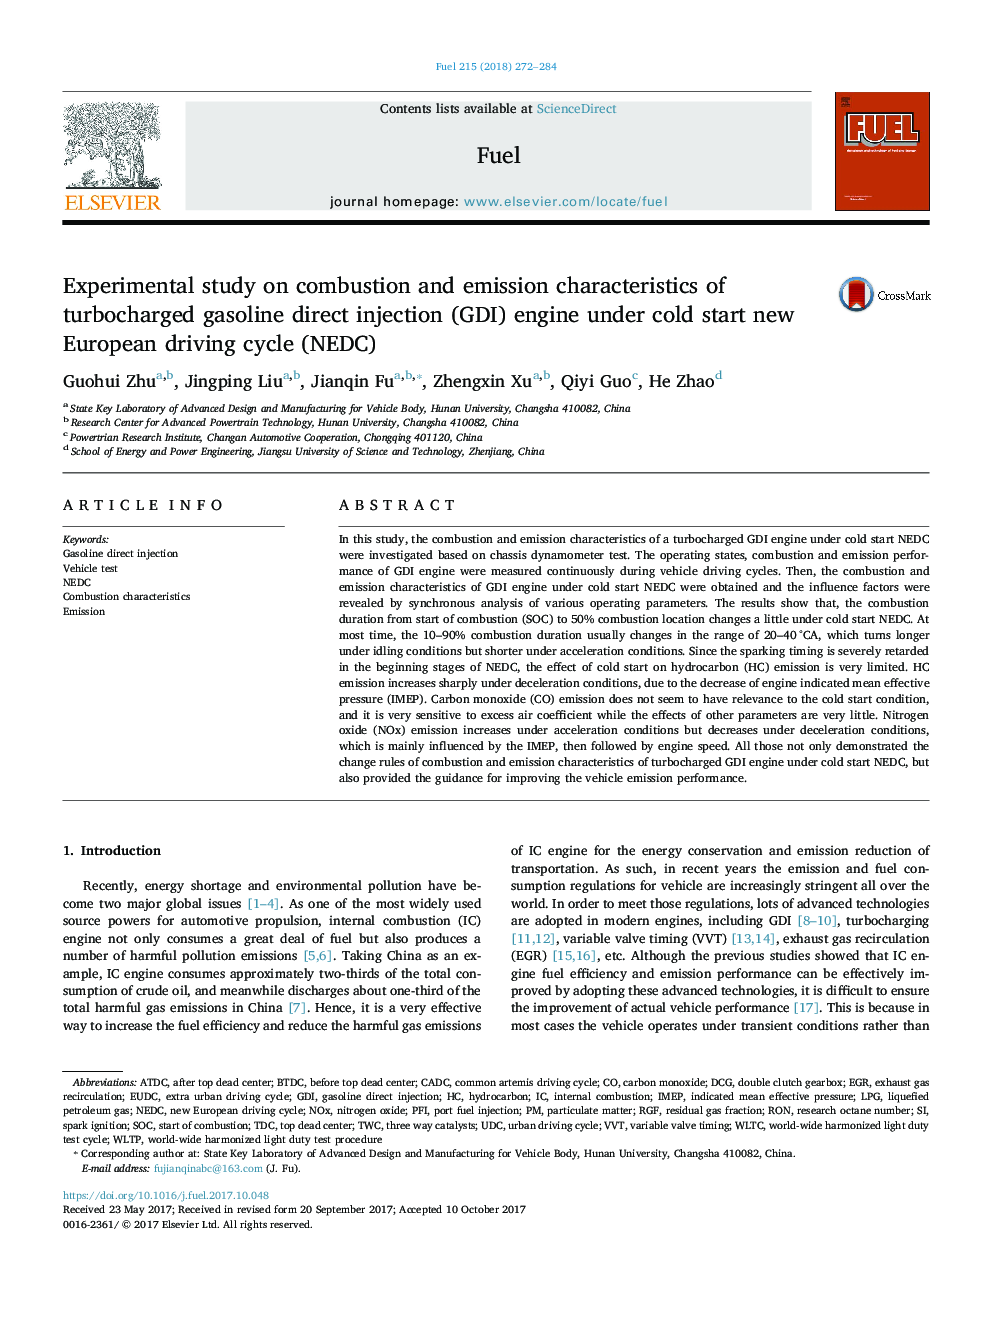 Experimental study on combustion and emission characteristics of turbocharged gasoline direct injection (GDI) engine under cold start new European driving cycle (NEDC)